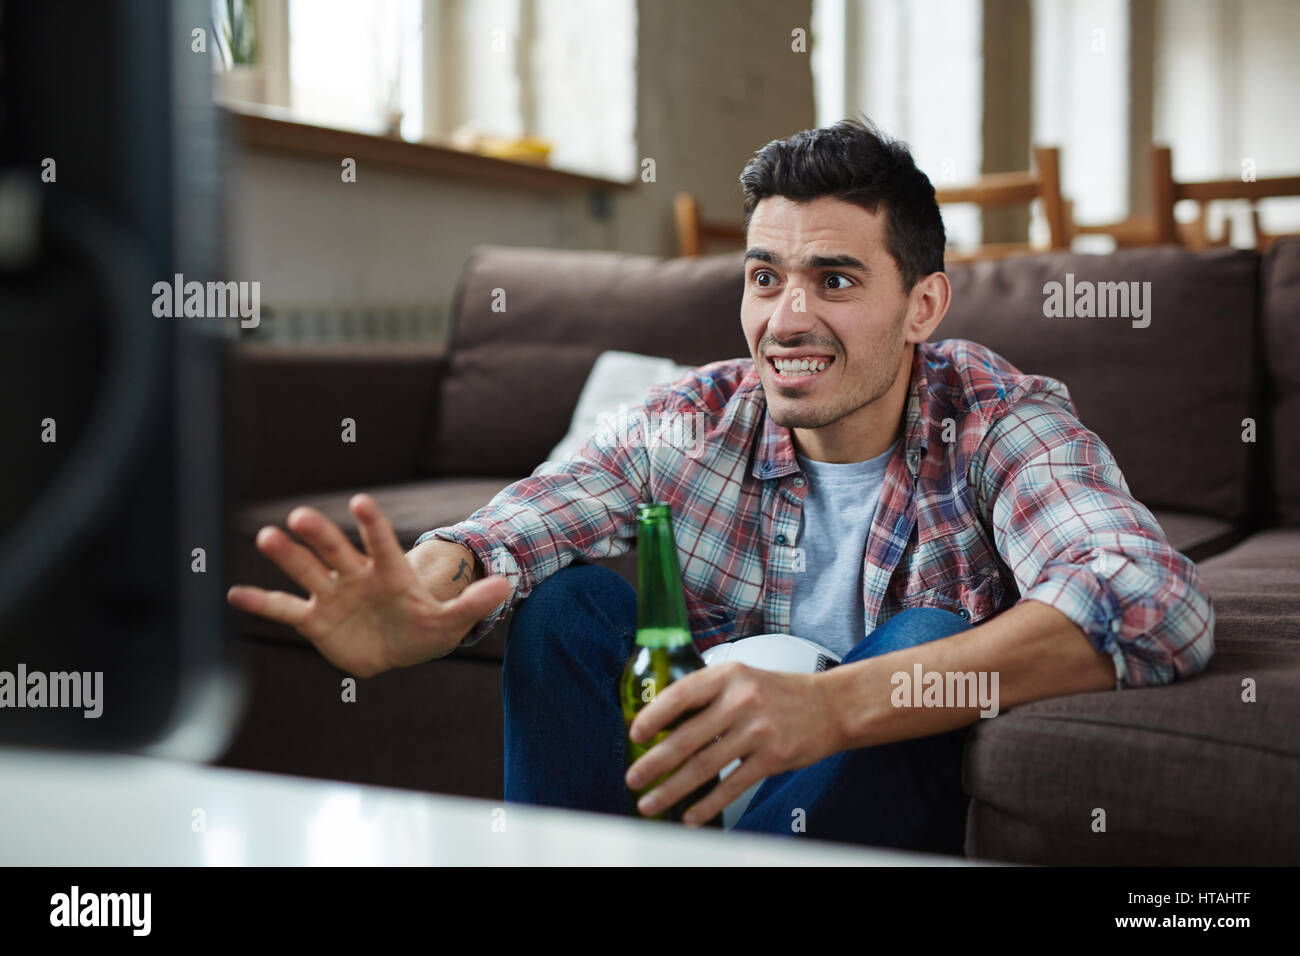 Guy with anxious expression sitting in front of tv set during football match Stock Photo